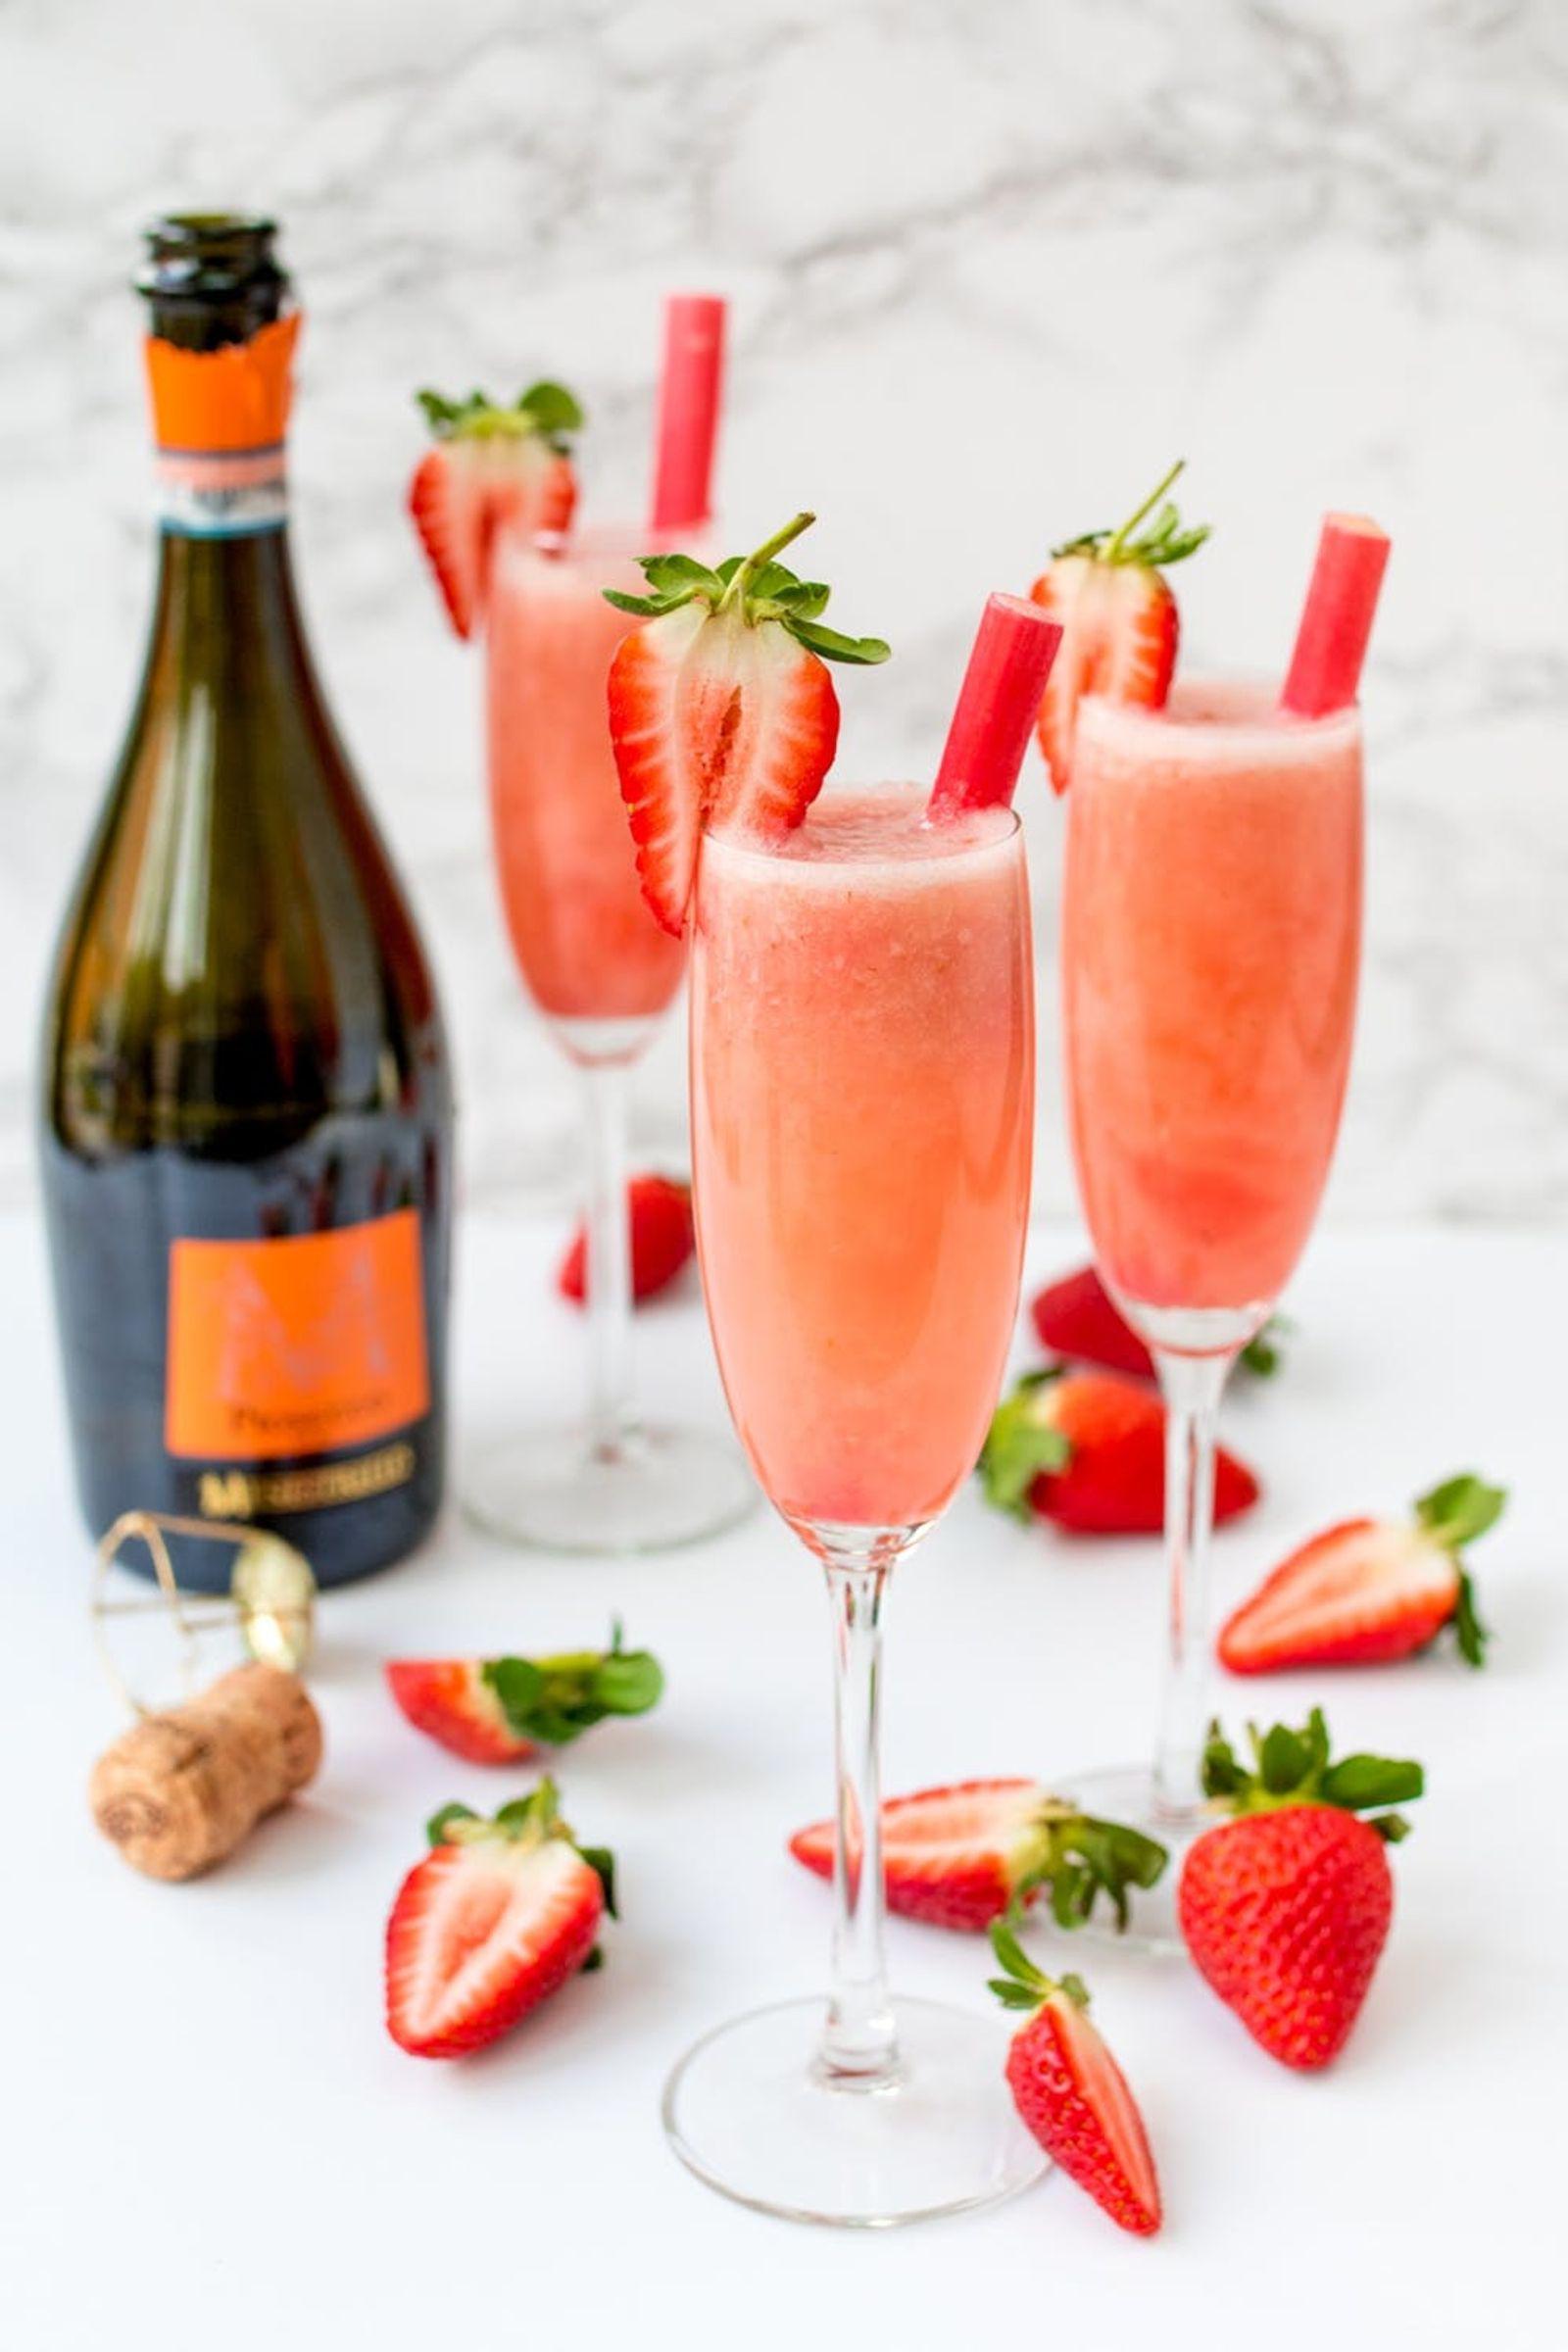 We're all about <strong>strawberry recipes</strong> once the weather starts warming up, and this fruity drink is one of our faves. It'll take you under 10 minutes to whip up, and then you can go back to prepping that Easter ham. (via Brit + Co.)